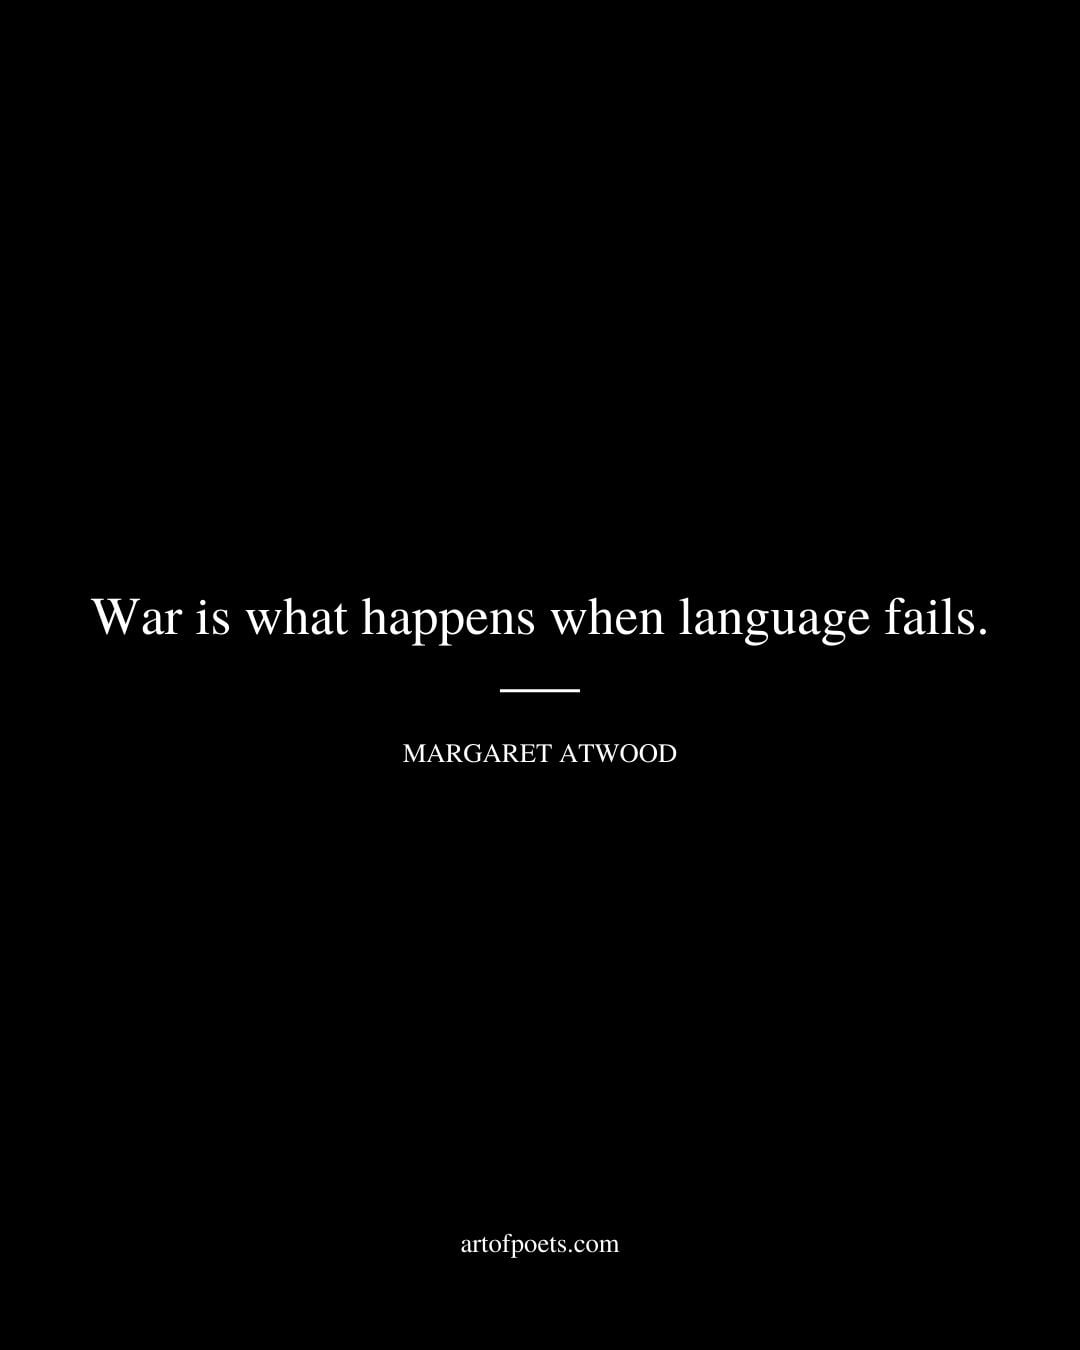 War is what happens when language fails. Margaret Atwood